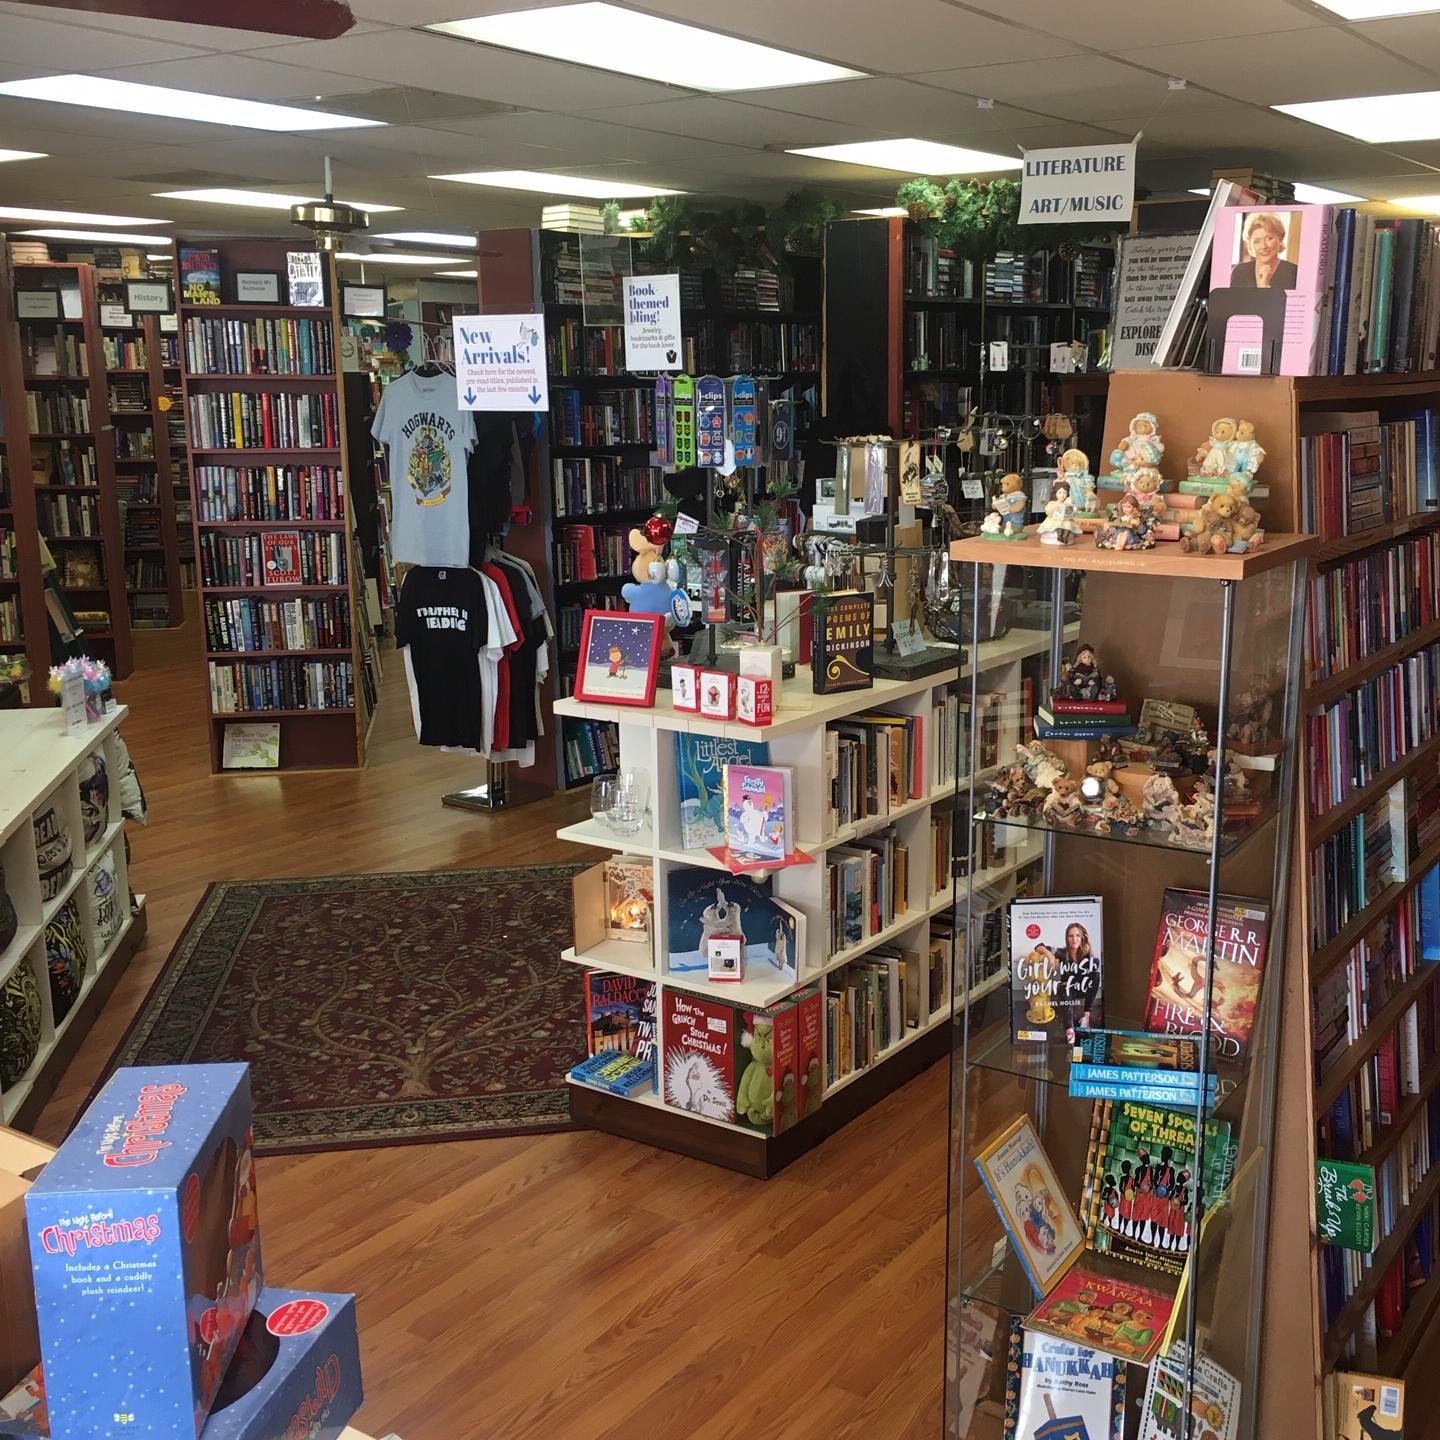 With more than 70,000 titles and 1700 square feet, Copperfield's Books is conveniently located on Louetta Road at Champions Forest Drive